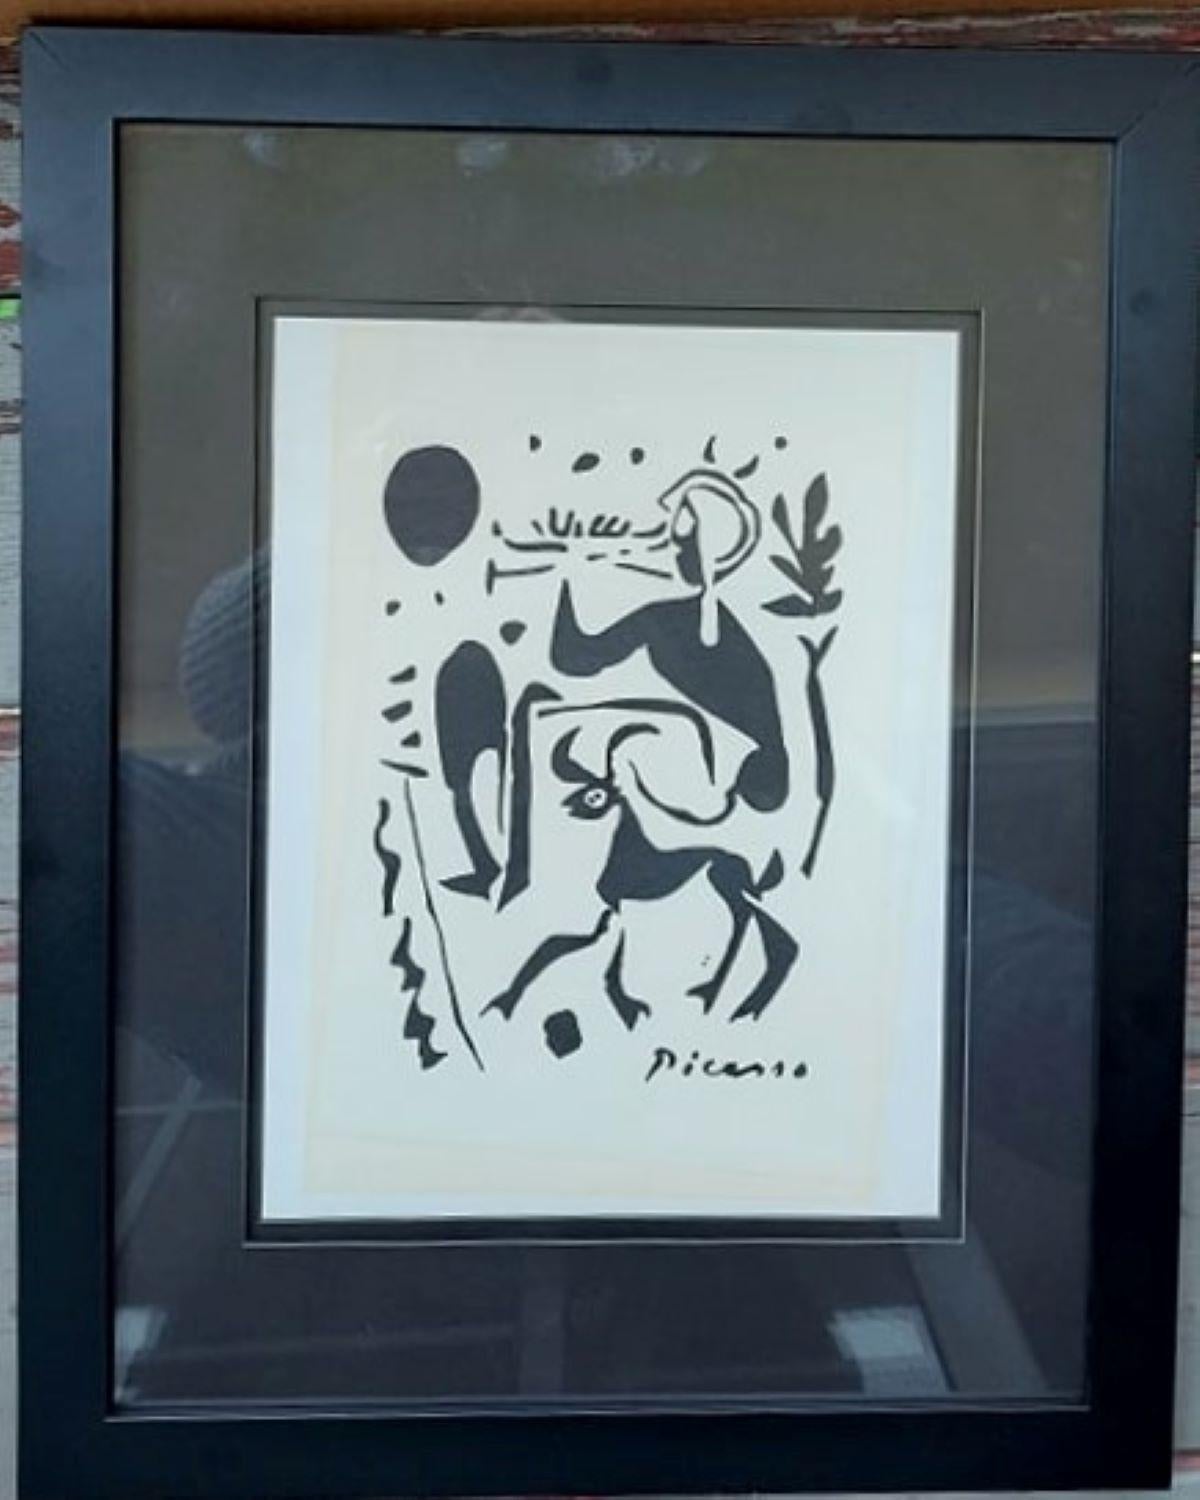 Musical Faun by Picasso  - Print by Pablo Picasso